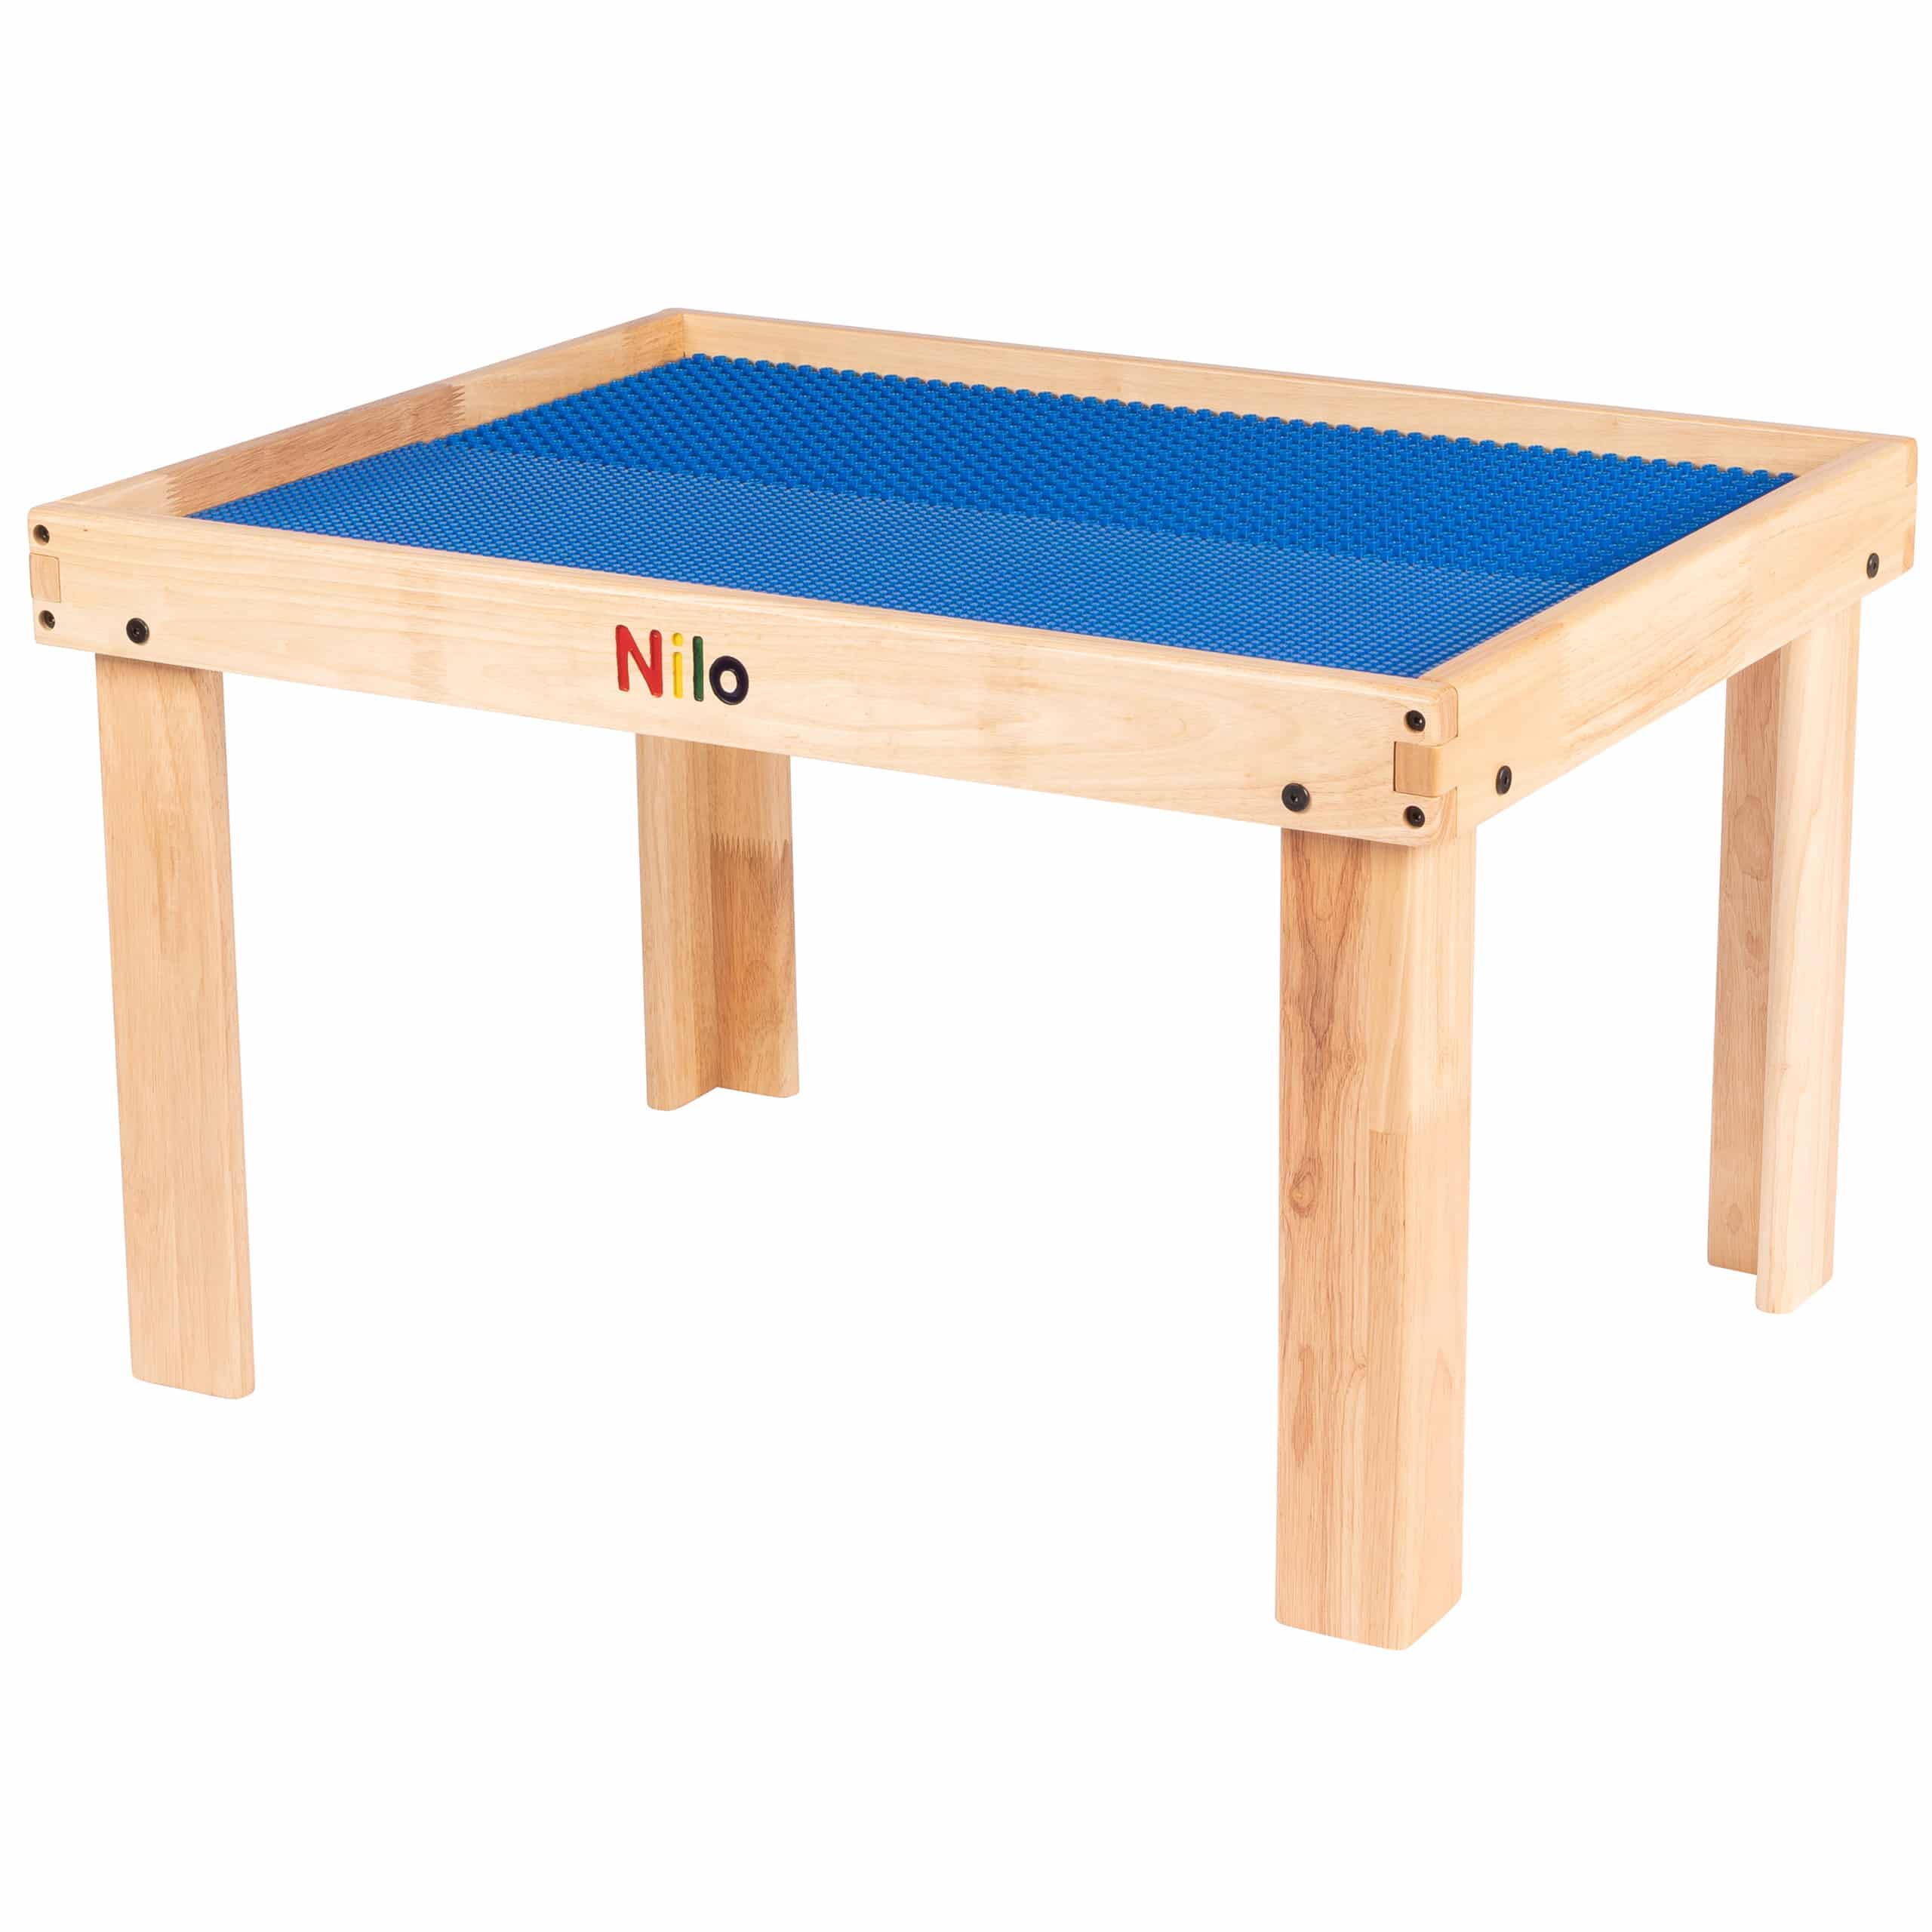 https://www.nilotoys.com/wp-content/uploads/2021/09/small-kids-activity-table-without-holes-blue-baseplates.jpg